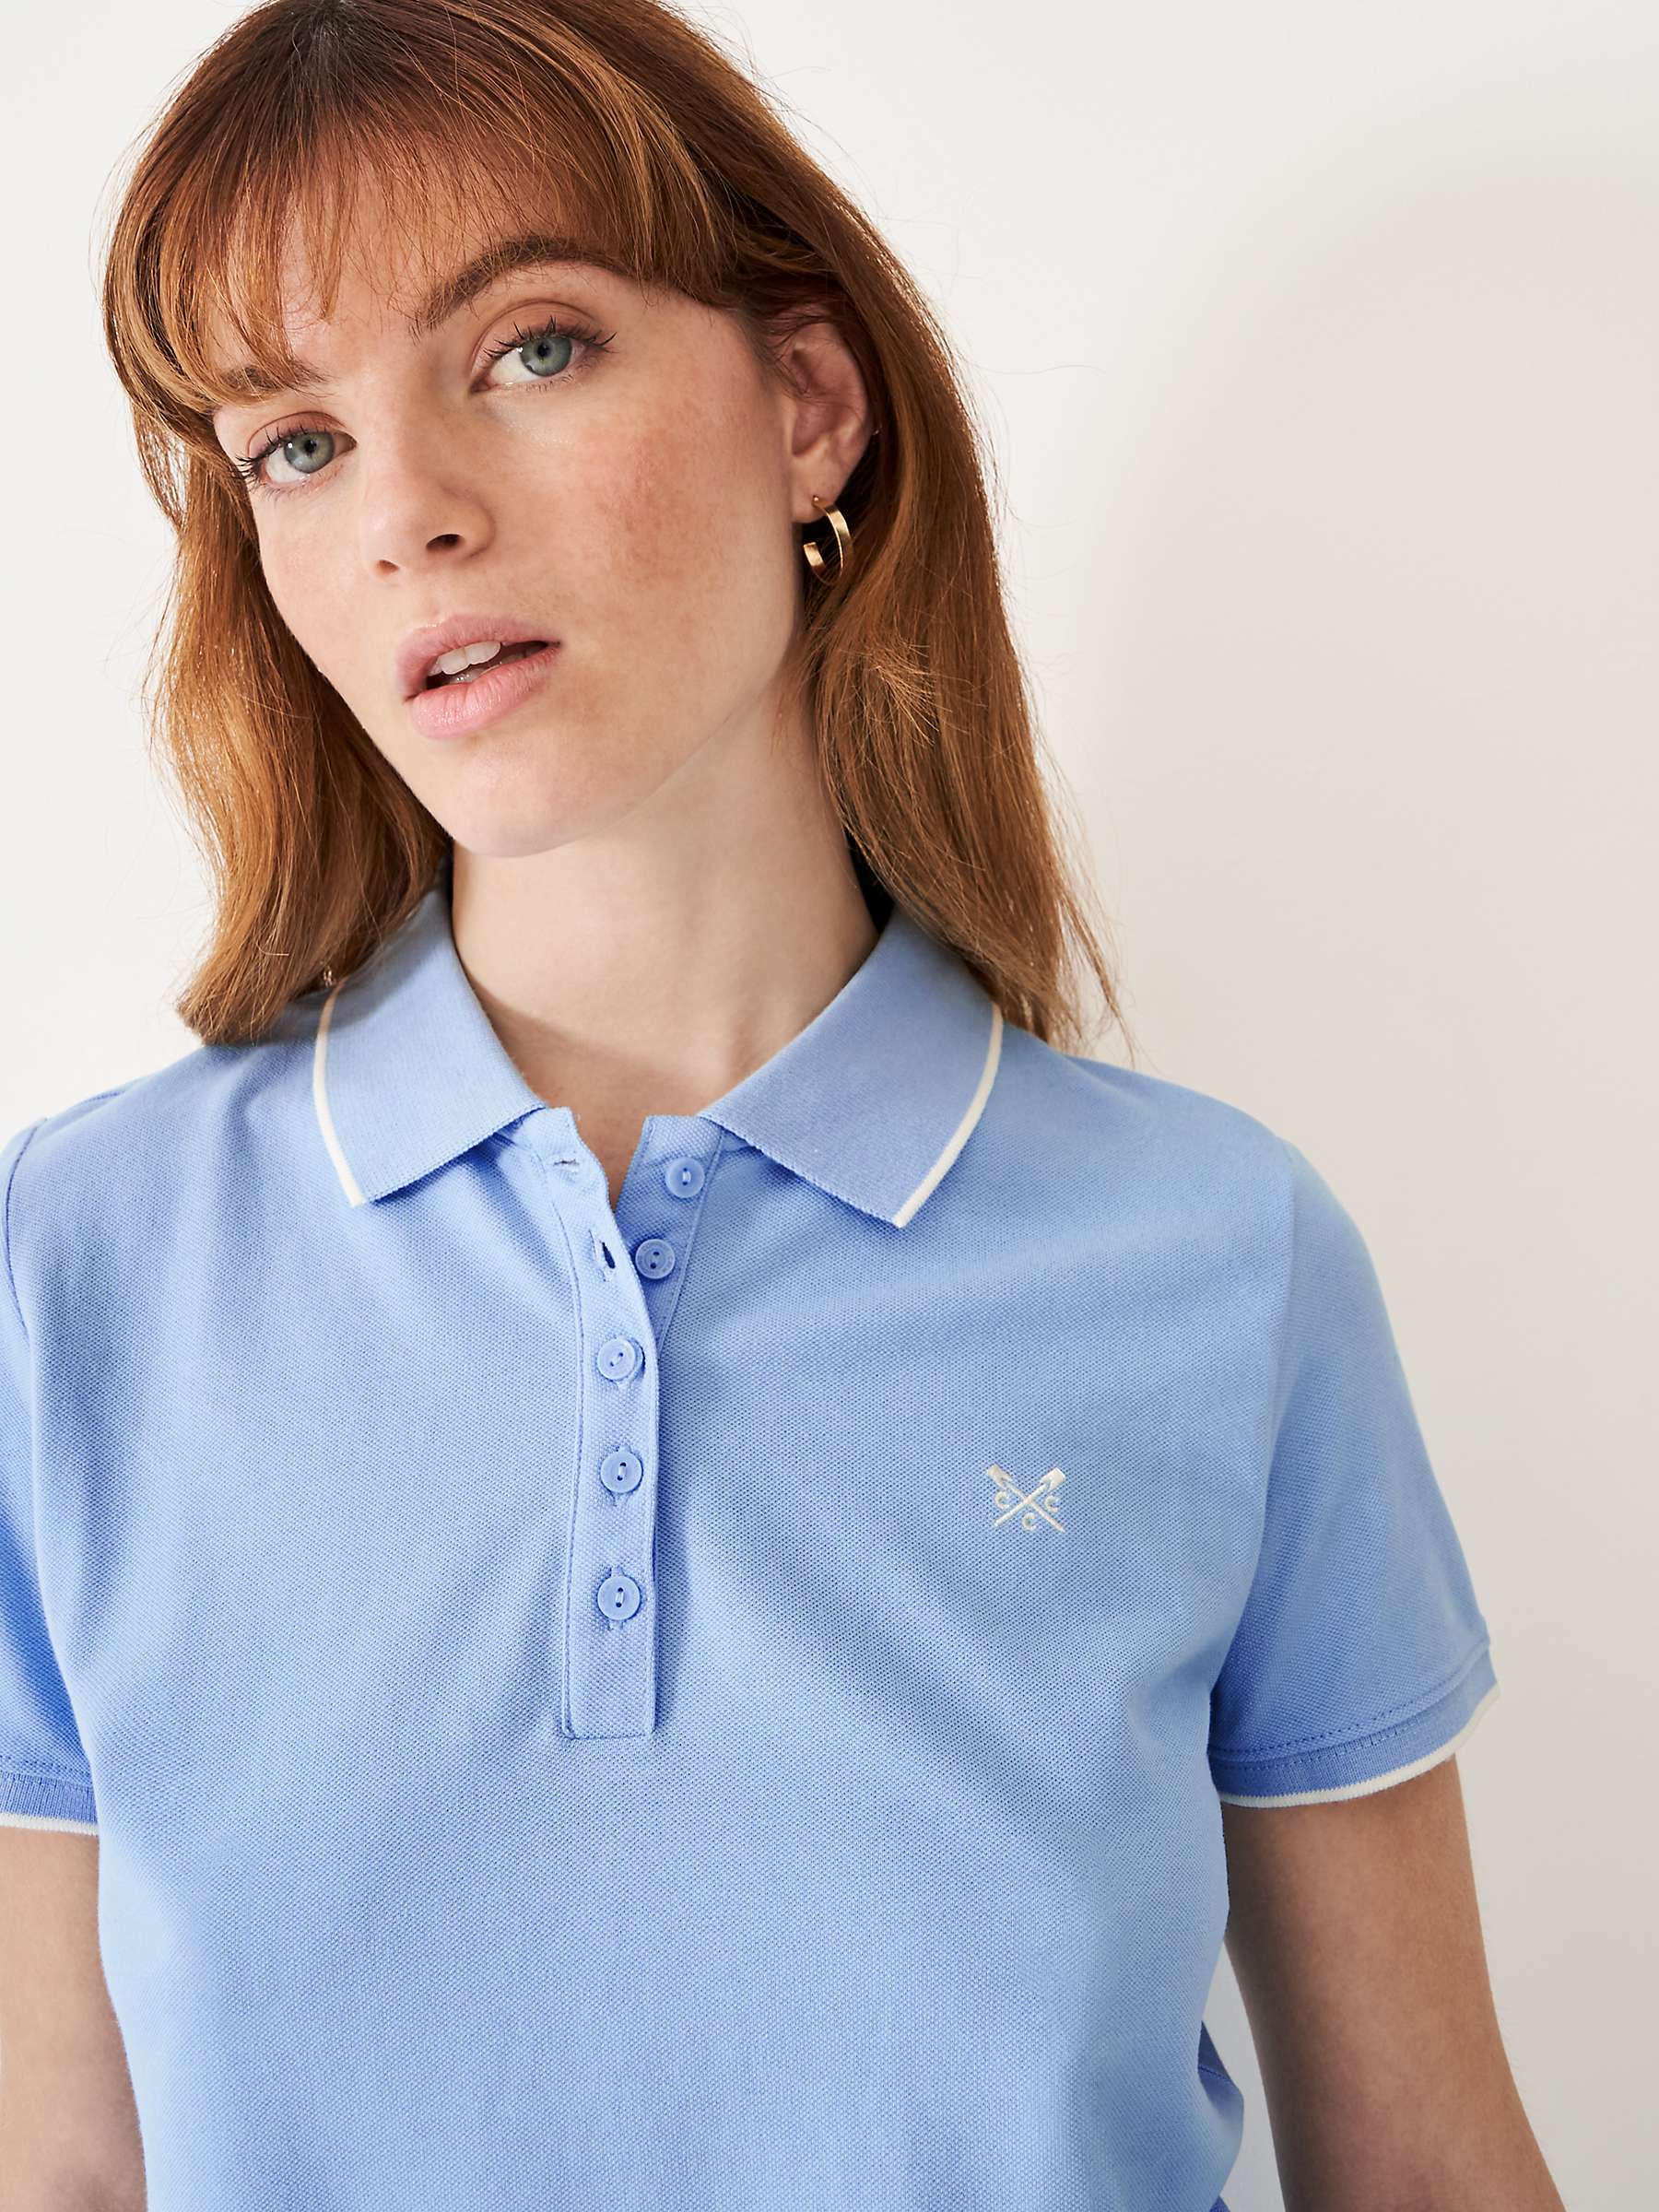 Buy Crew Clothing Classic Short Sleeve Polo Top Online at johnlewis.com